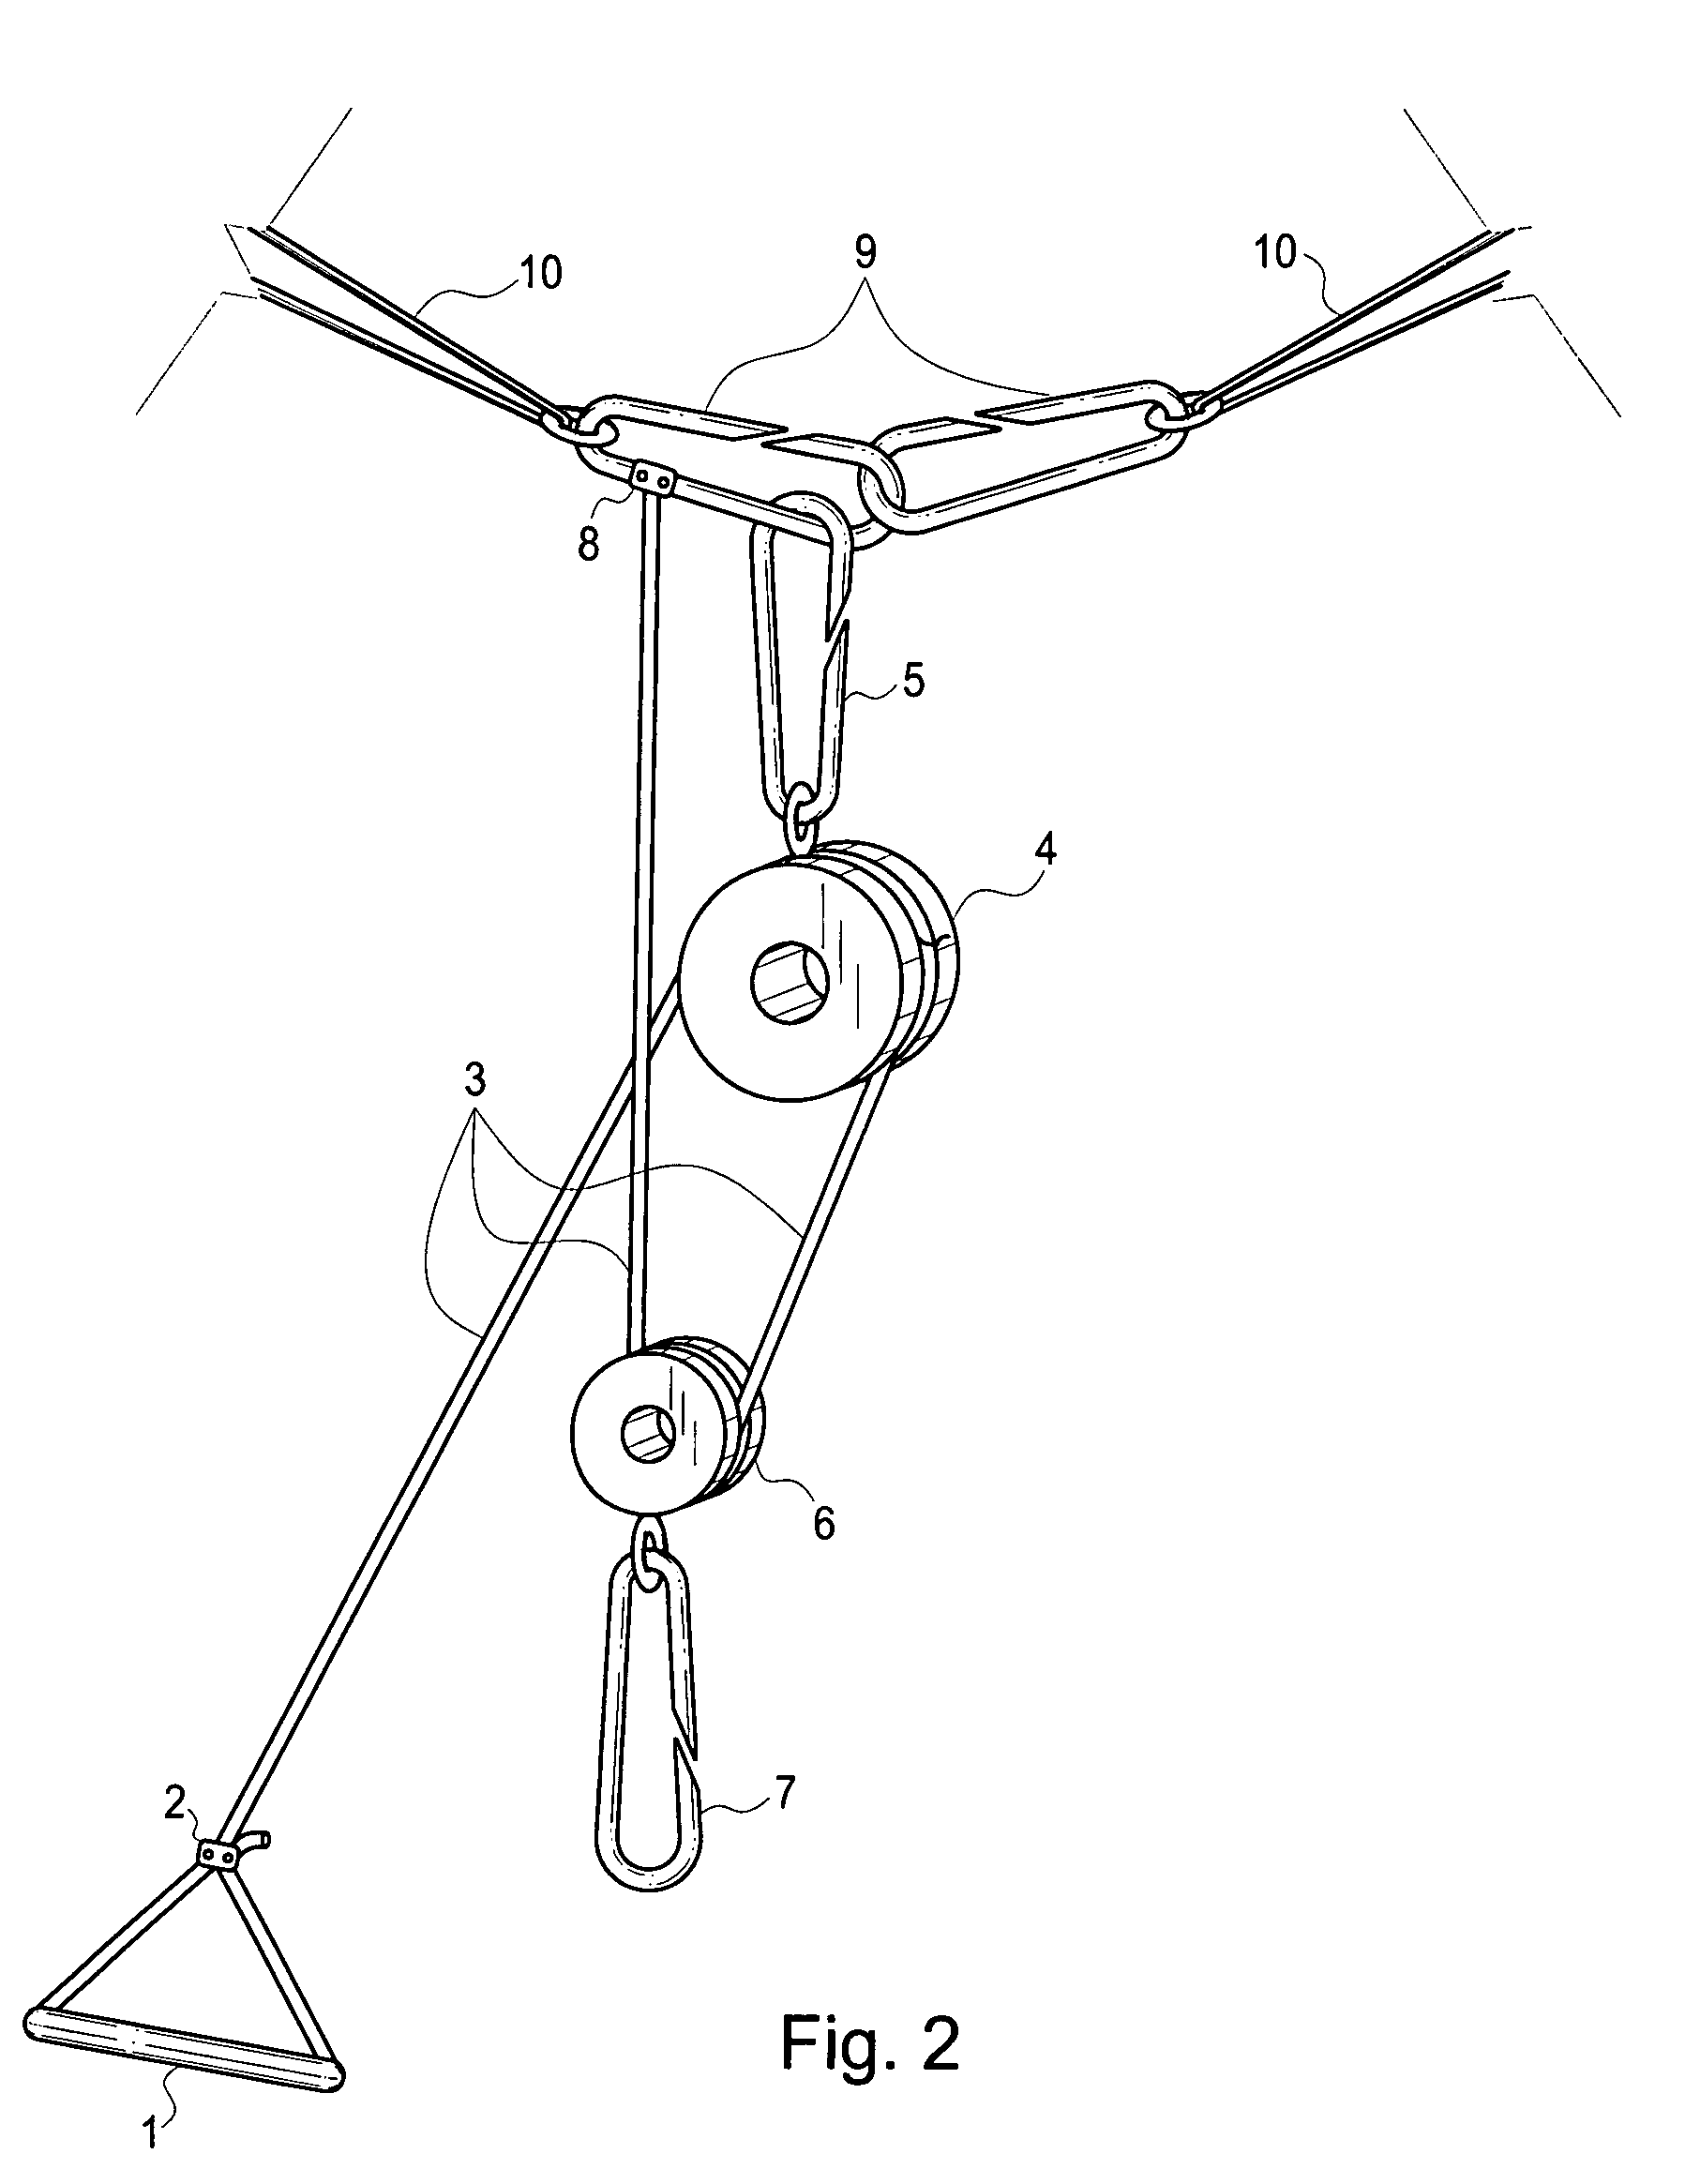 Apparatus and method to facilitate loading and unloading of passenger vehicle cargo